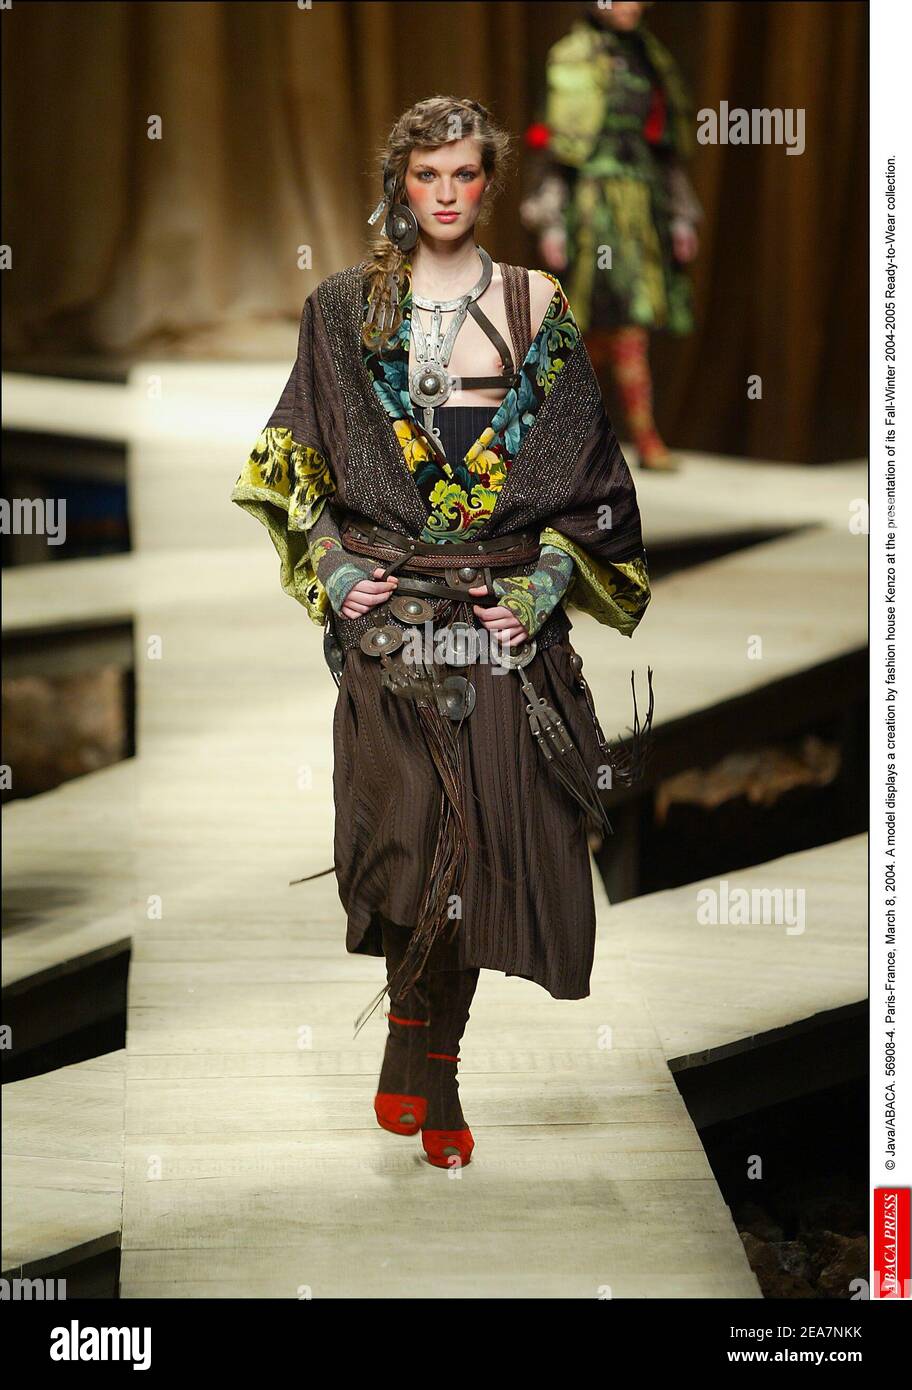 © Java/ABACA. 56908-4. Paris-France, March 8, 2004. A model displays a creation by fashion house Kenzo at the presentation of its Fall-Winter 2004-2005 Ready-to-Wear collection. Stock Photo